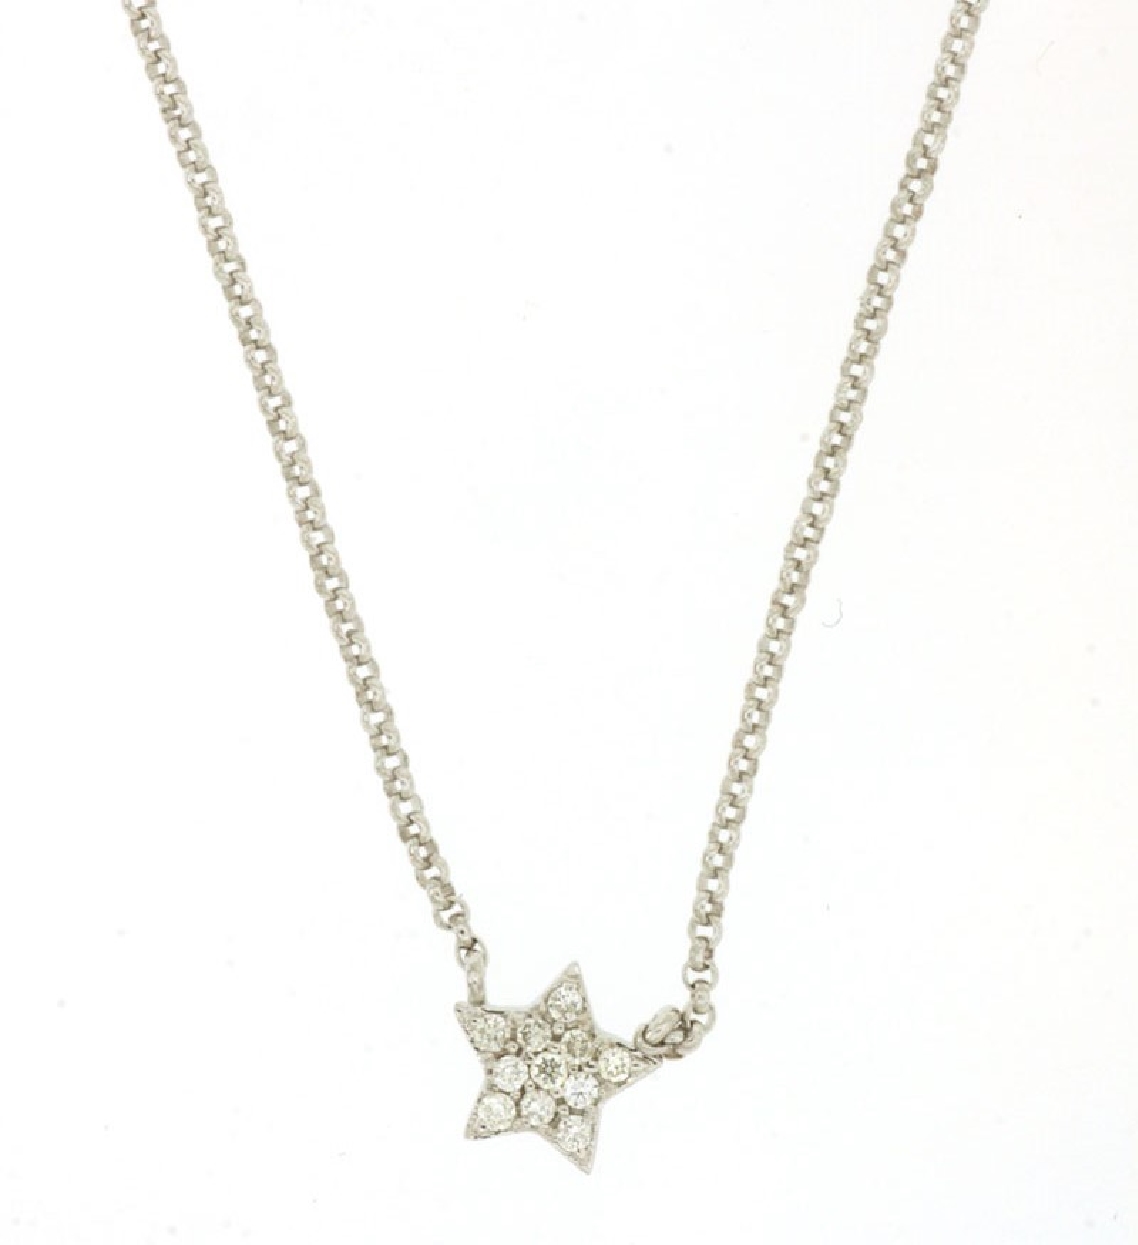 14K White Gold Pave Diamond Star Necklac; 18 inches
0.05CTTW